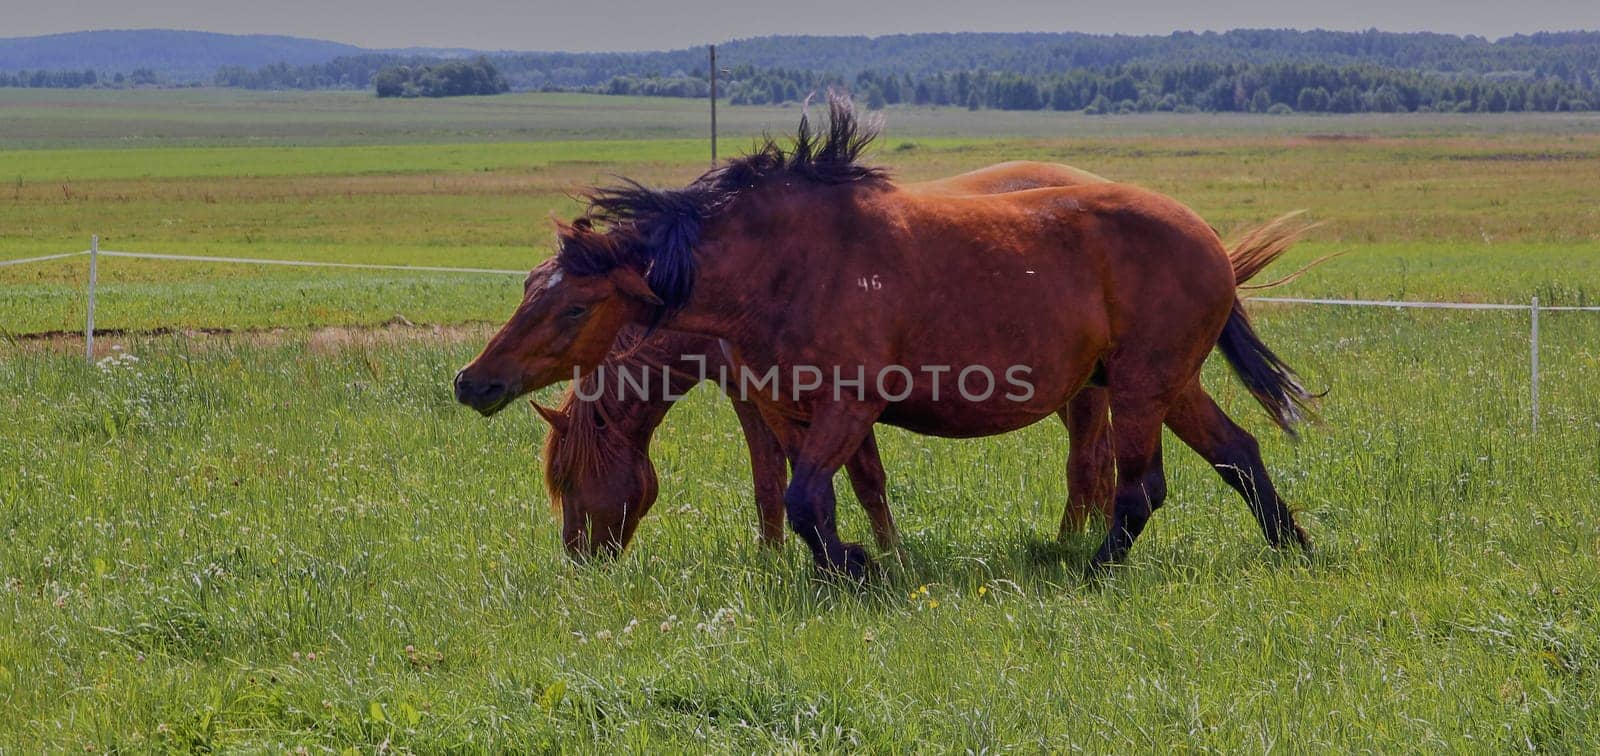 A beautiful brown horse grazes on a flowering sunny meadow in a field along with a herd of horses. by Hil